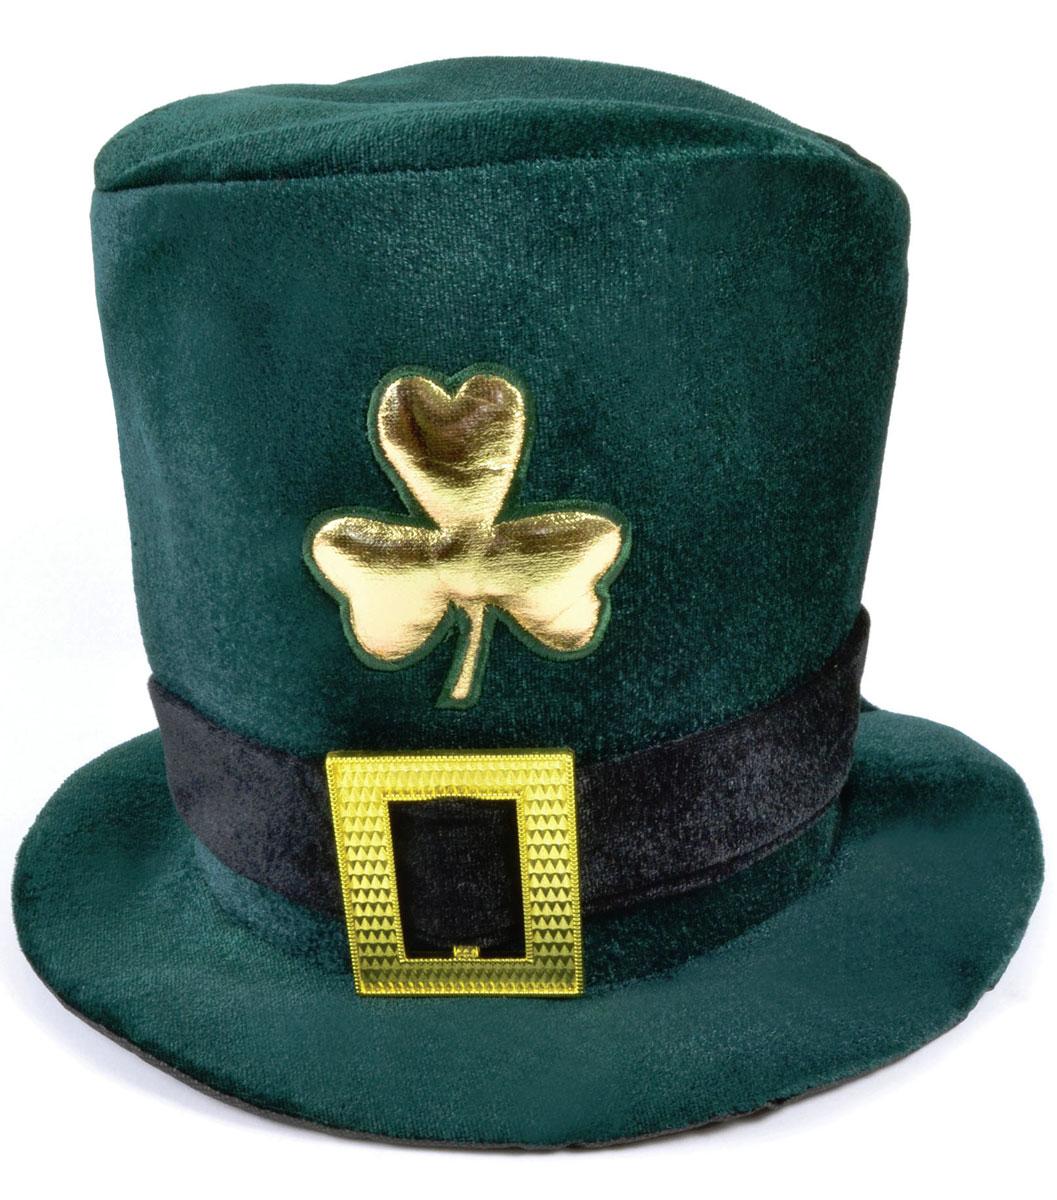 Deluxe St Patrick's Day Hat for Adults by Bristol Novs BH398 available here at Karnival Costumes online party shop